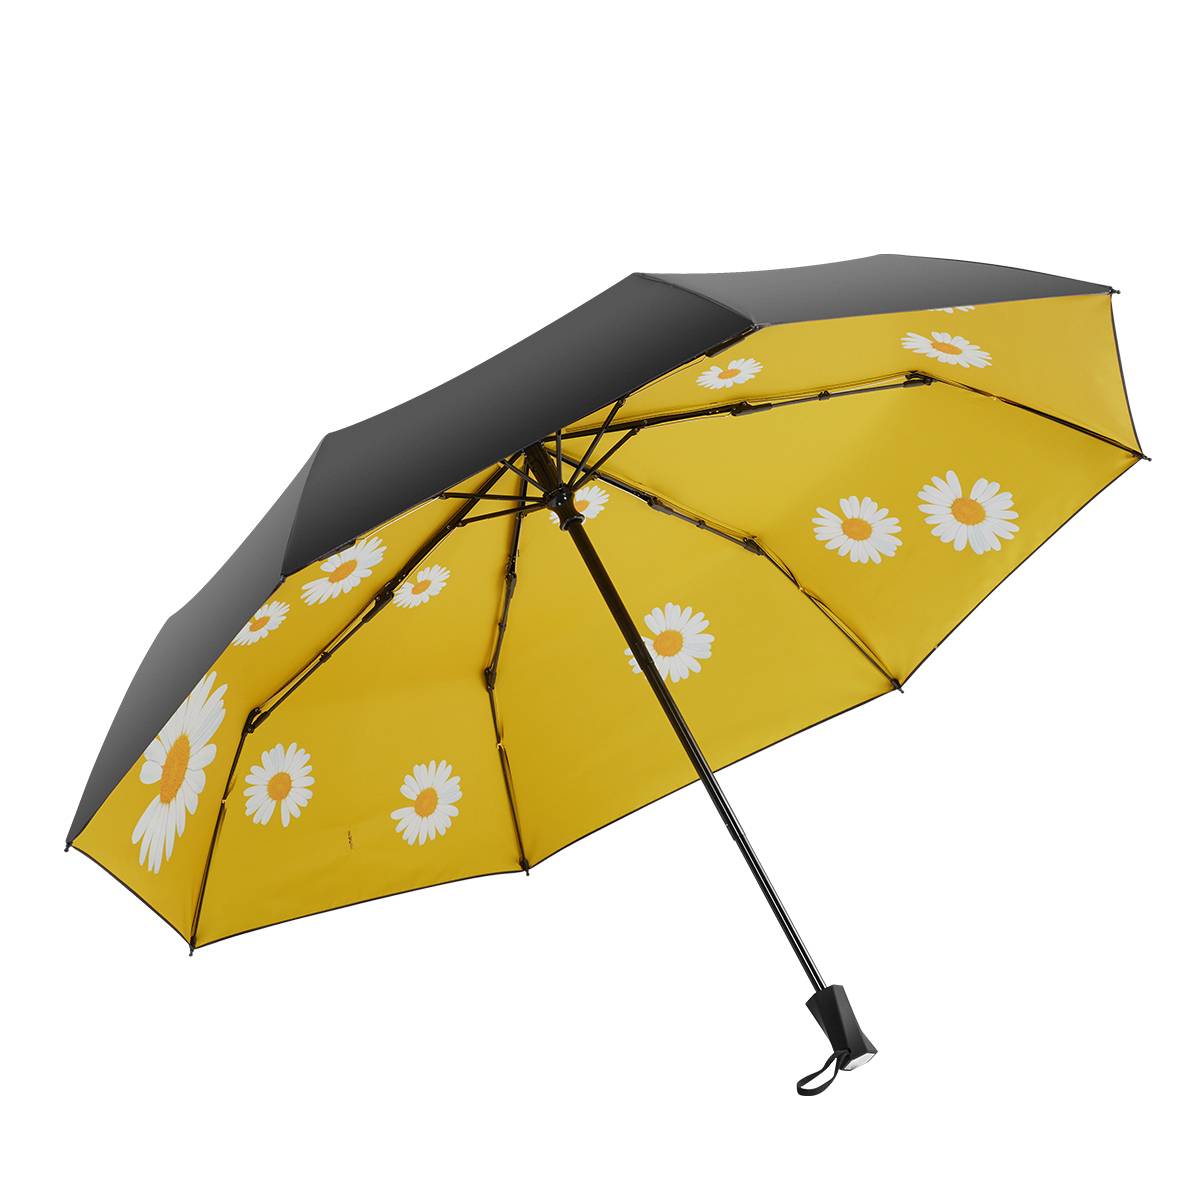 Factory Free sample Umbrella Dinosaur - 21 inch 8 ribs manual open unique handle design with daisy flower 3 fold umbrella – DongFangZhanXin